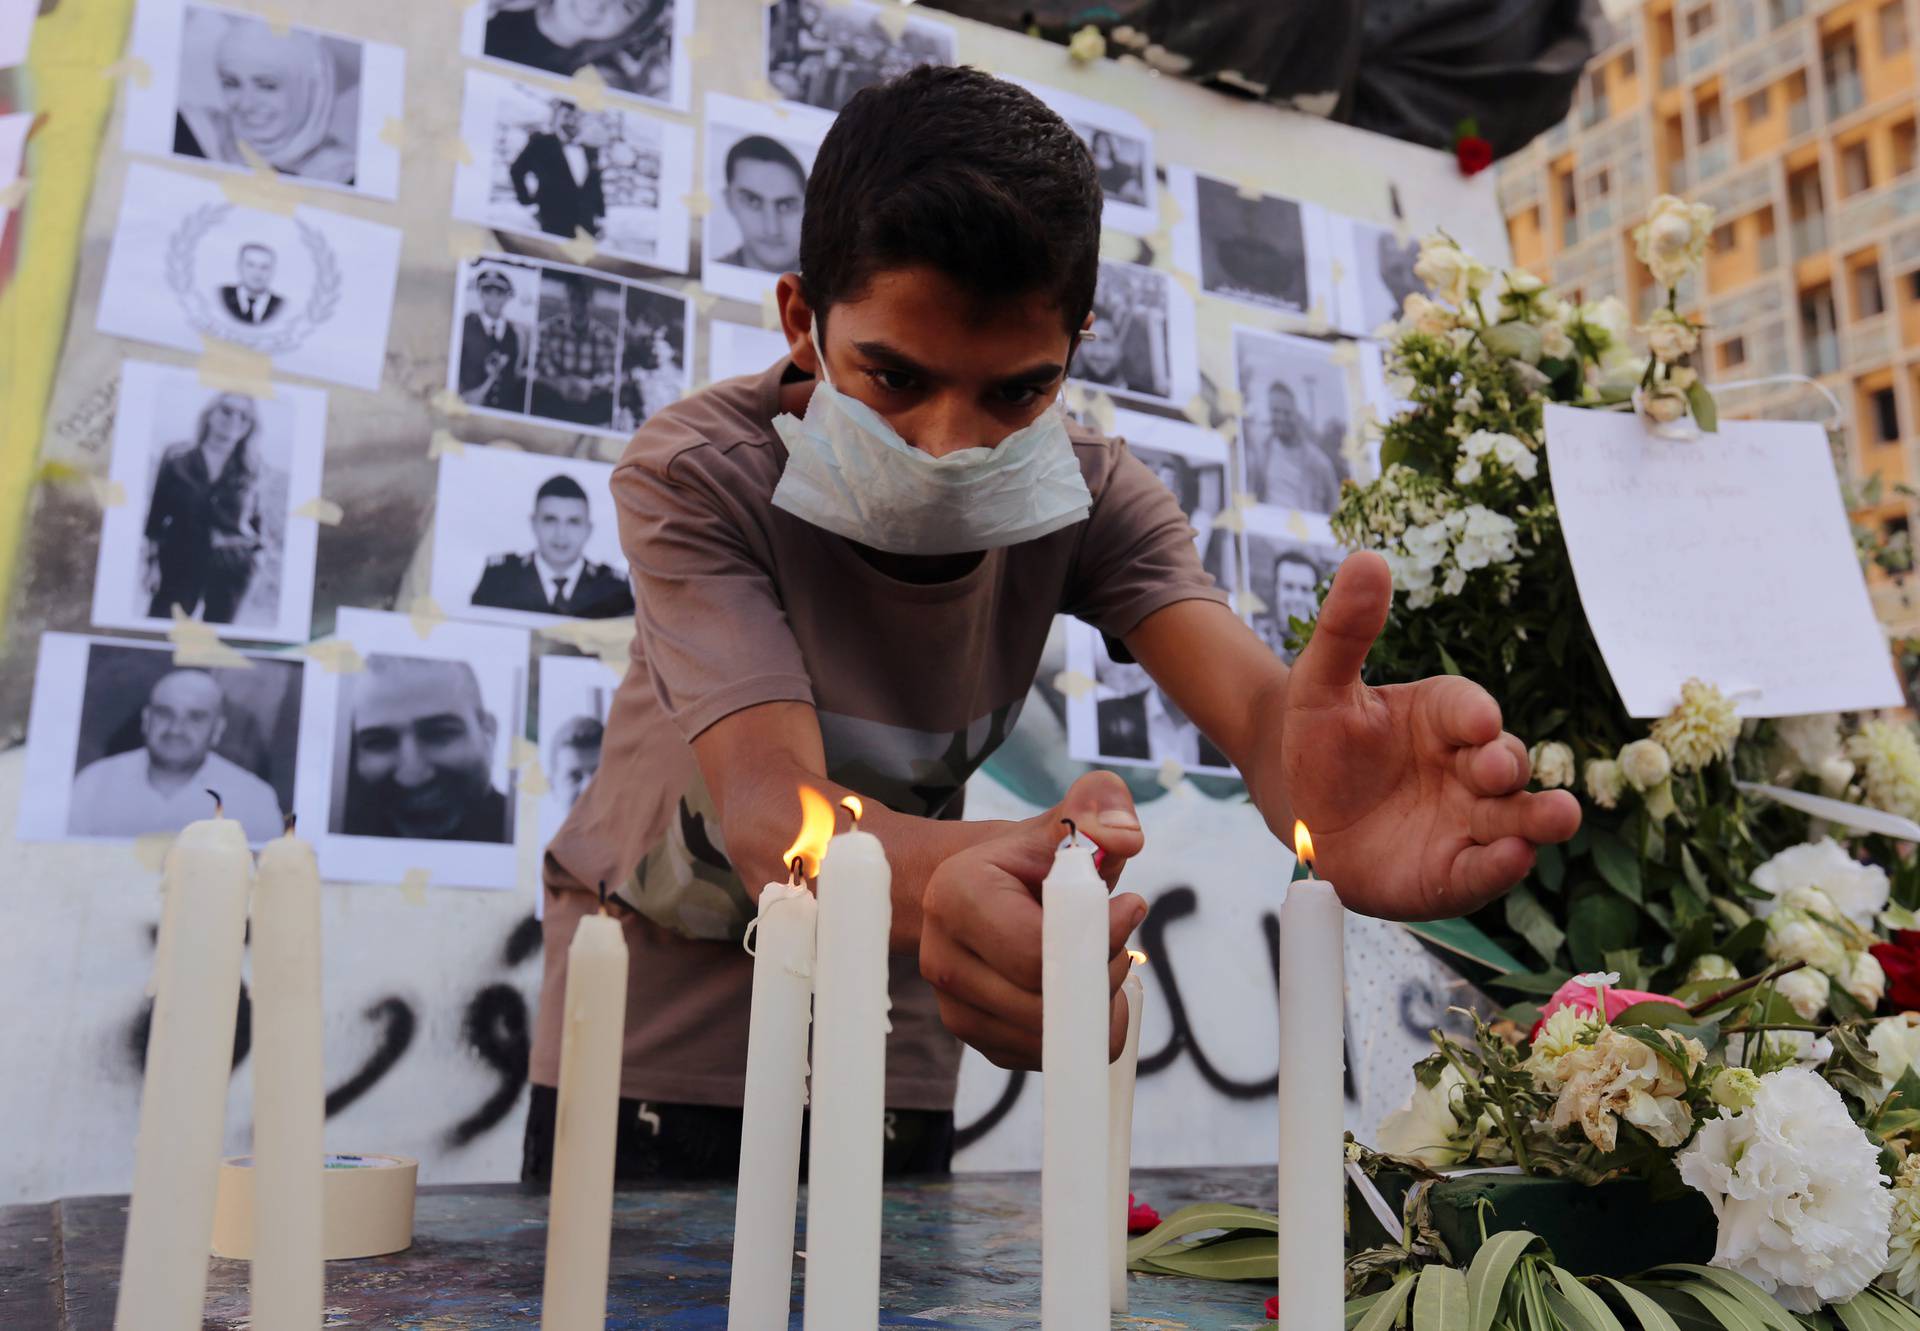 A man lights a candle to mourn the victims of Tuesday's blast in Beirut's port area, at Martyrs' Square in Beirut